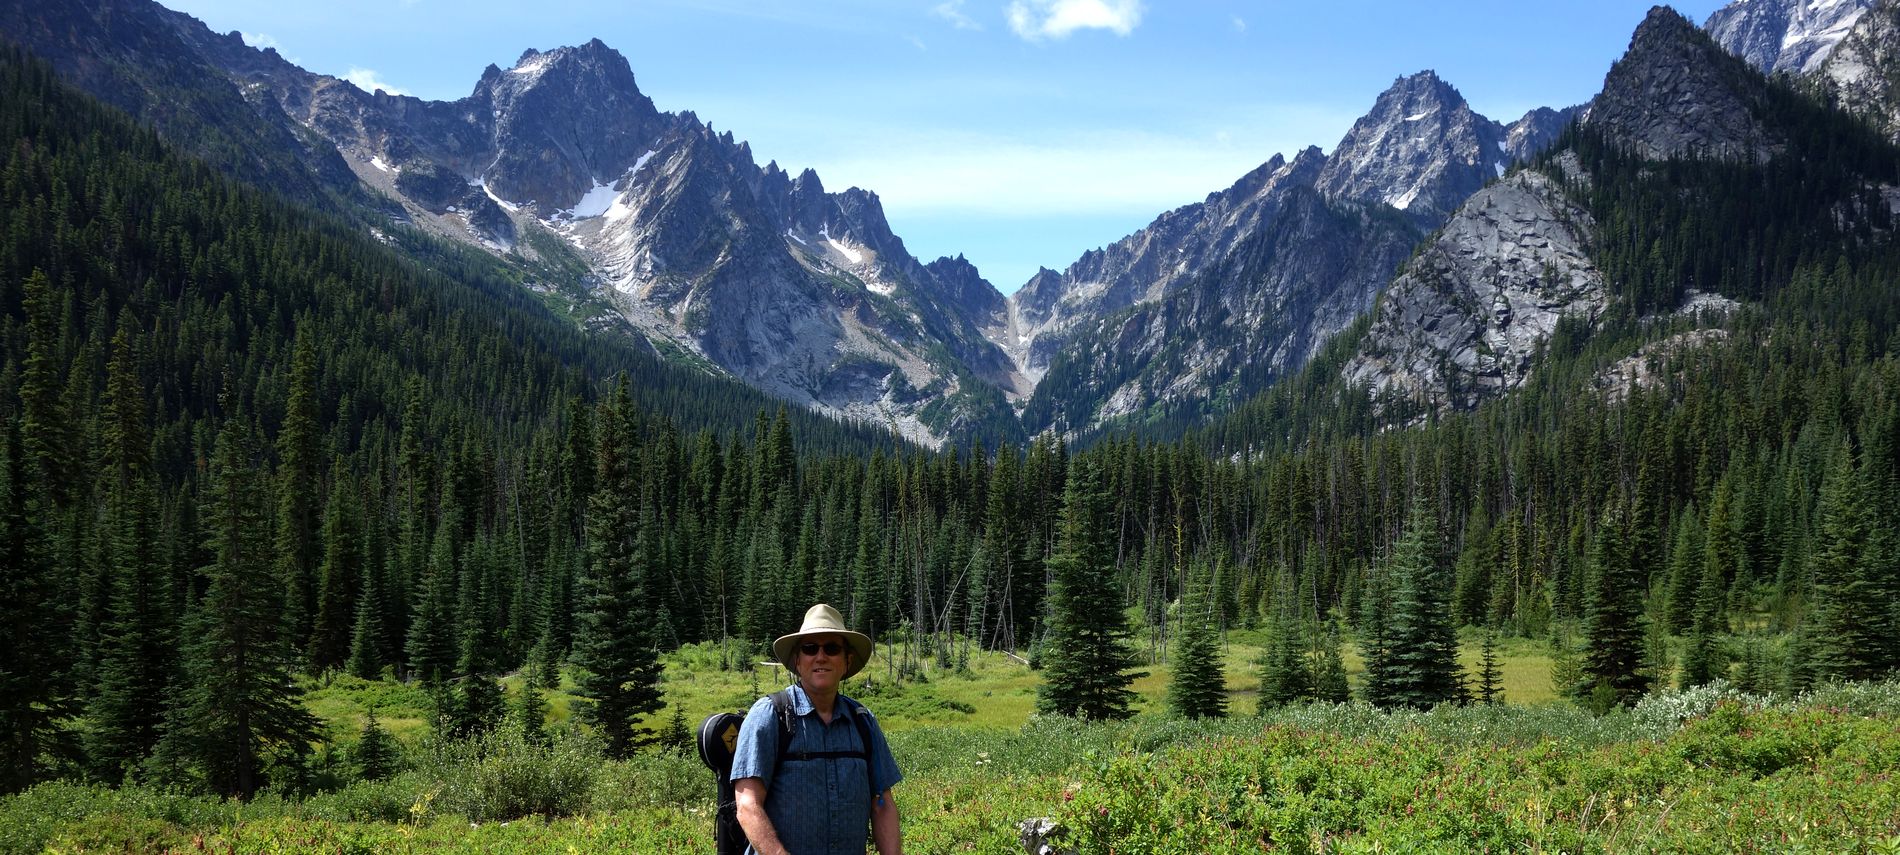 Summer view of Innkeeper hiking in lush green meadows framed by jagged mountain peaks.